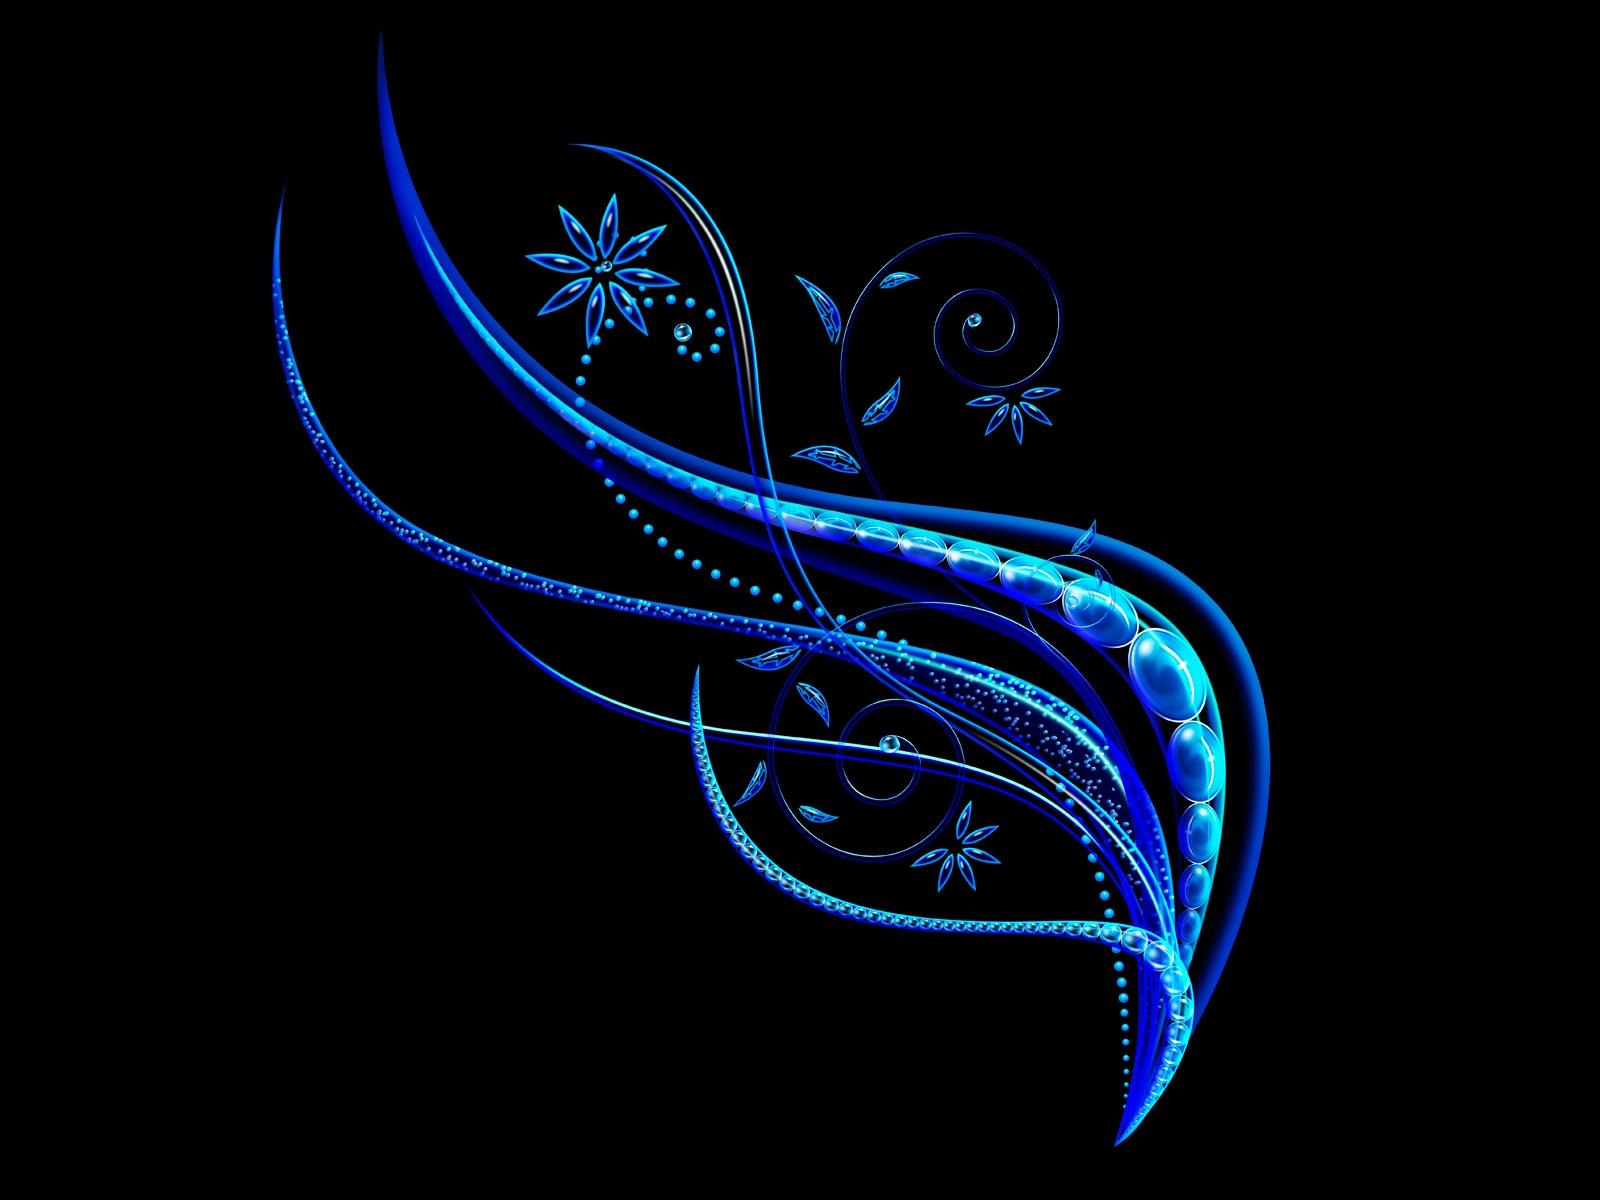 Patterns, Blue, Black Background - Cool Patterns And Designs - HD Wallpaper 